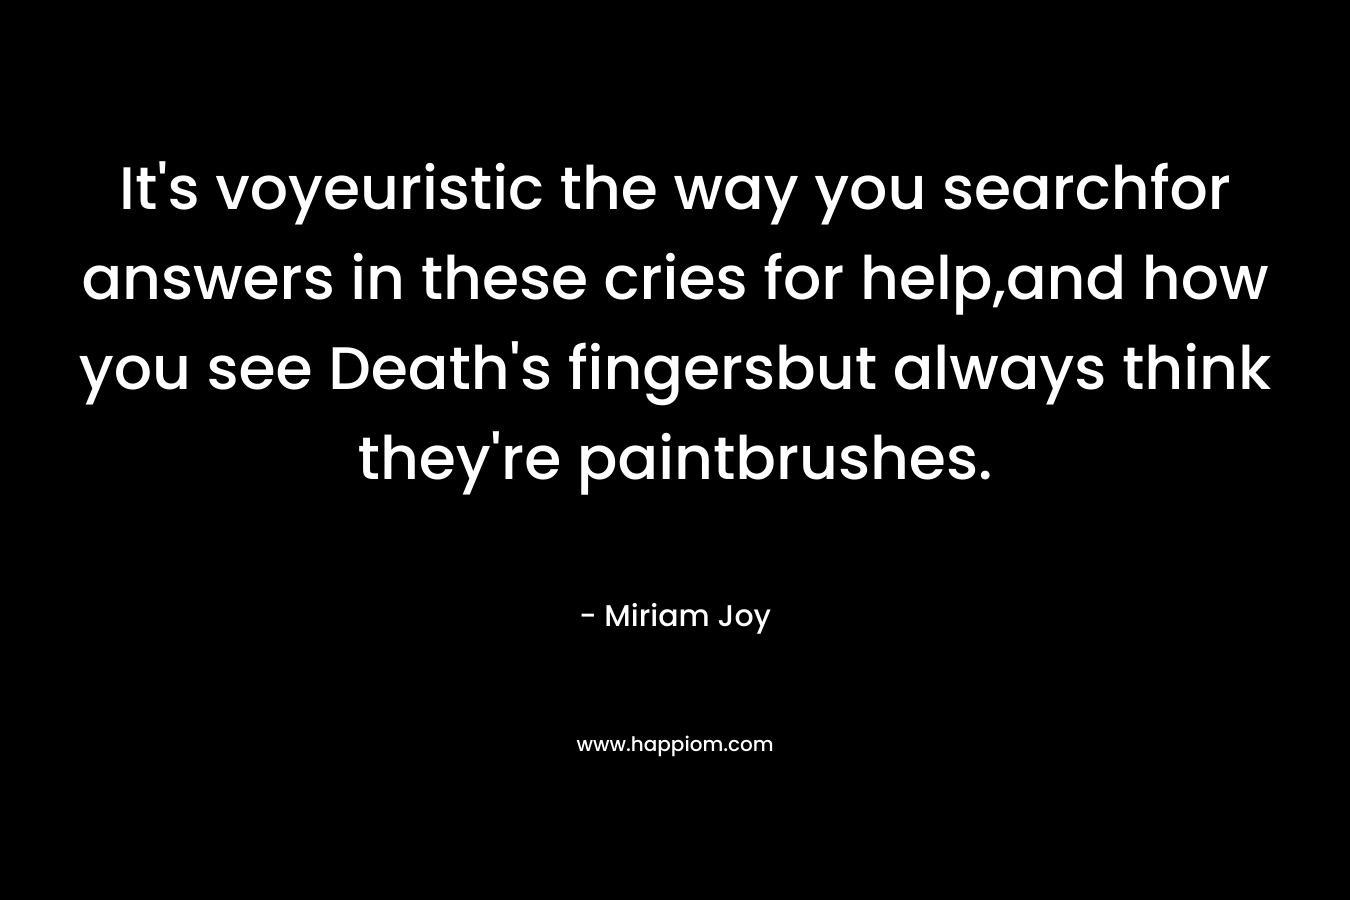 It's voyeuristic the way you searchfor answers in these cries for help,and how you see Death's fingersbut always think they're paintbrushes.